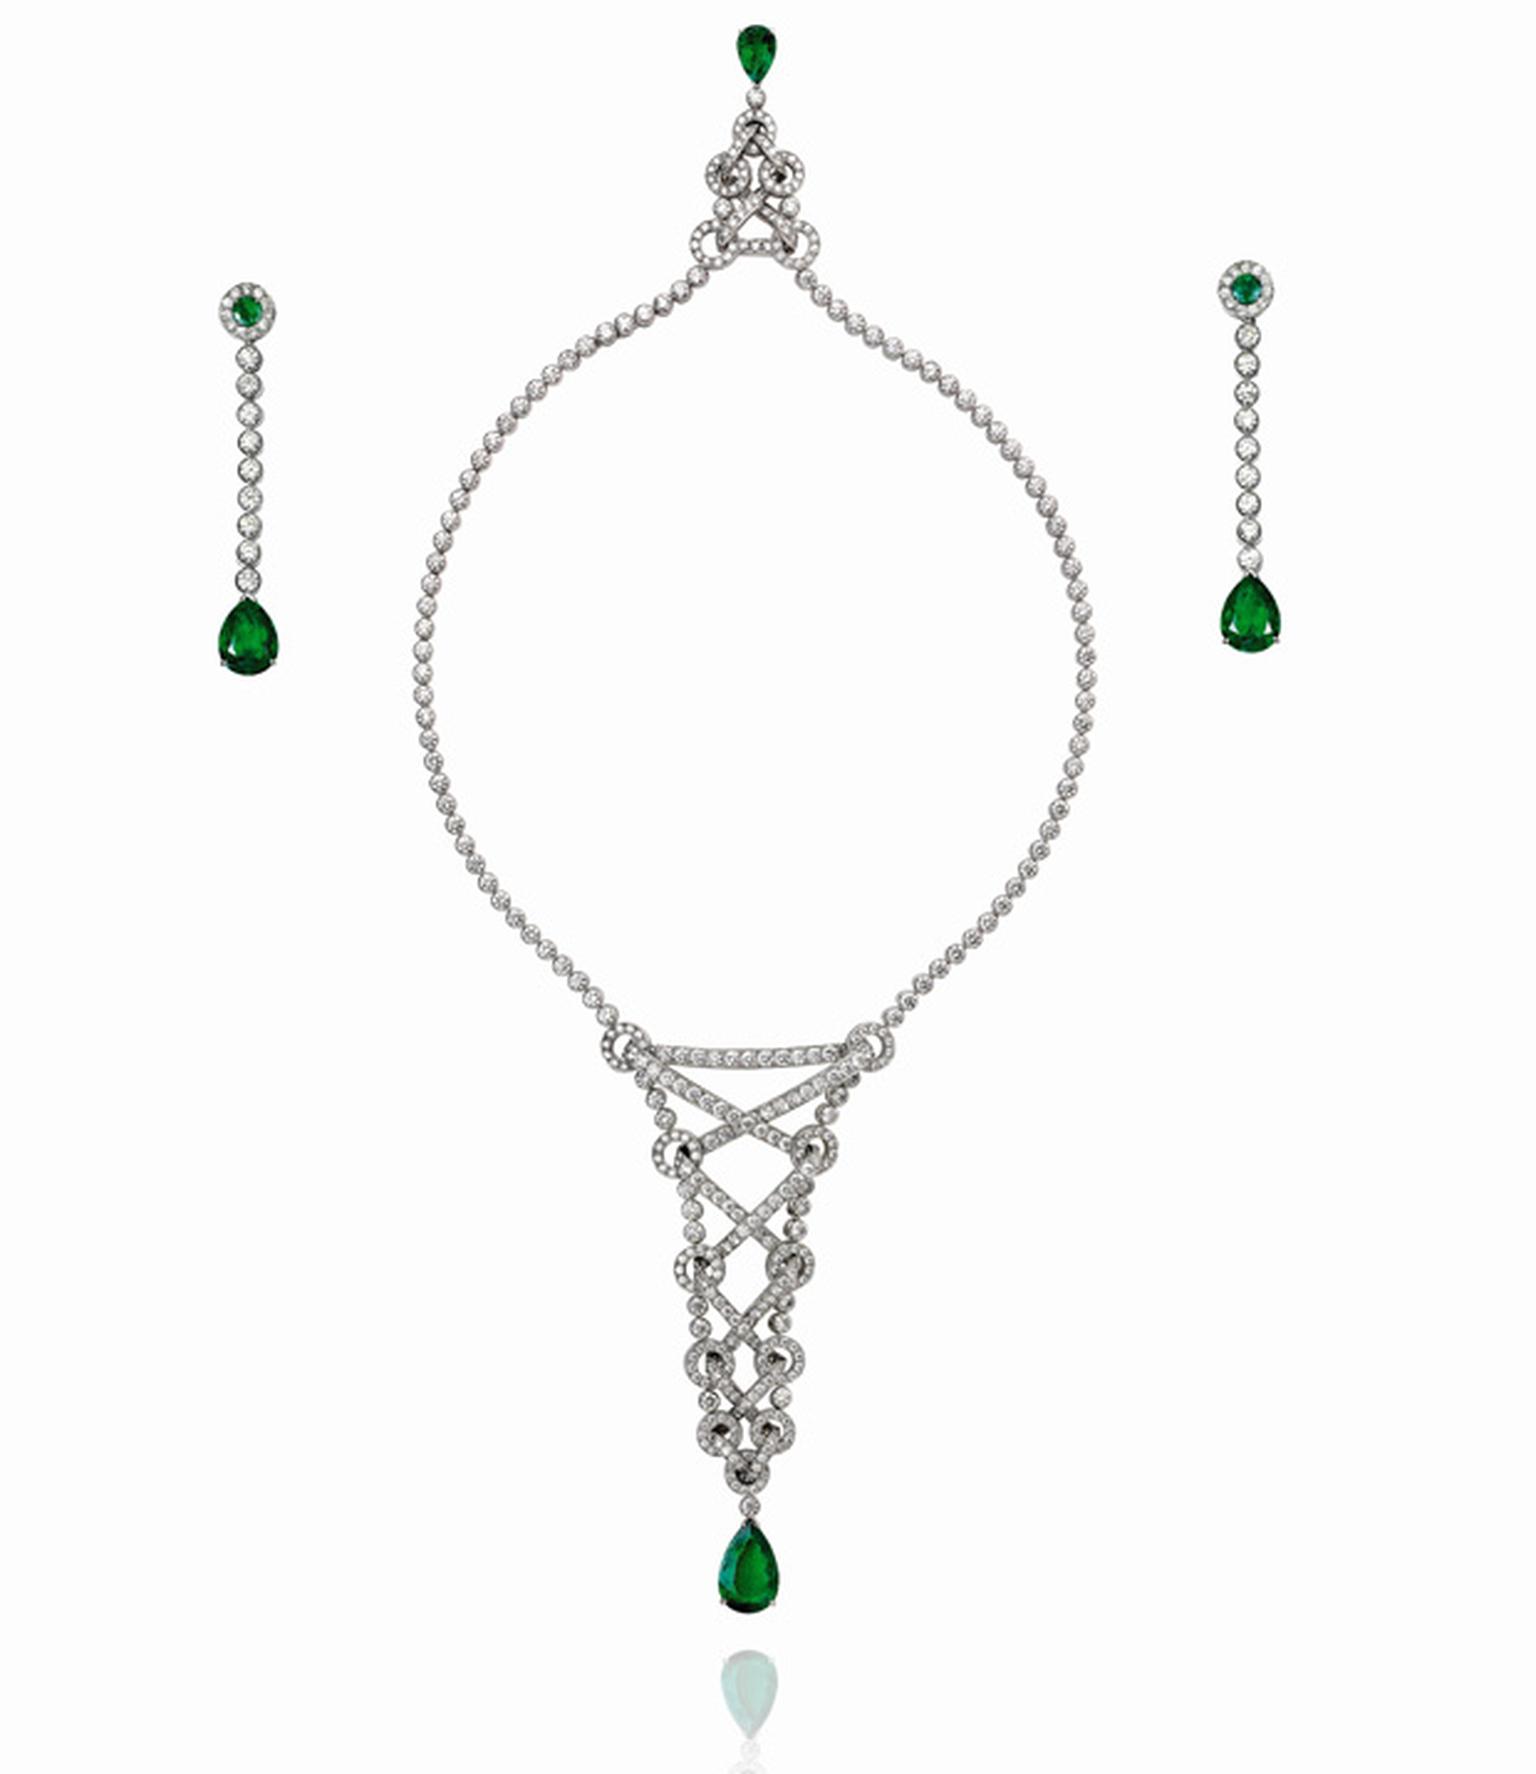 Piaget white gold necklace set with diamond and two emeralds